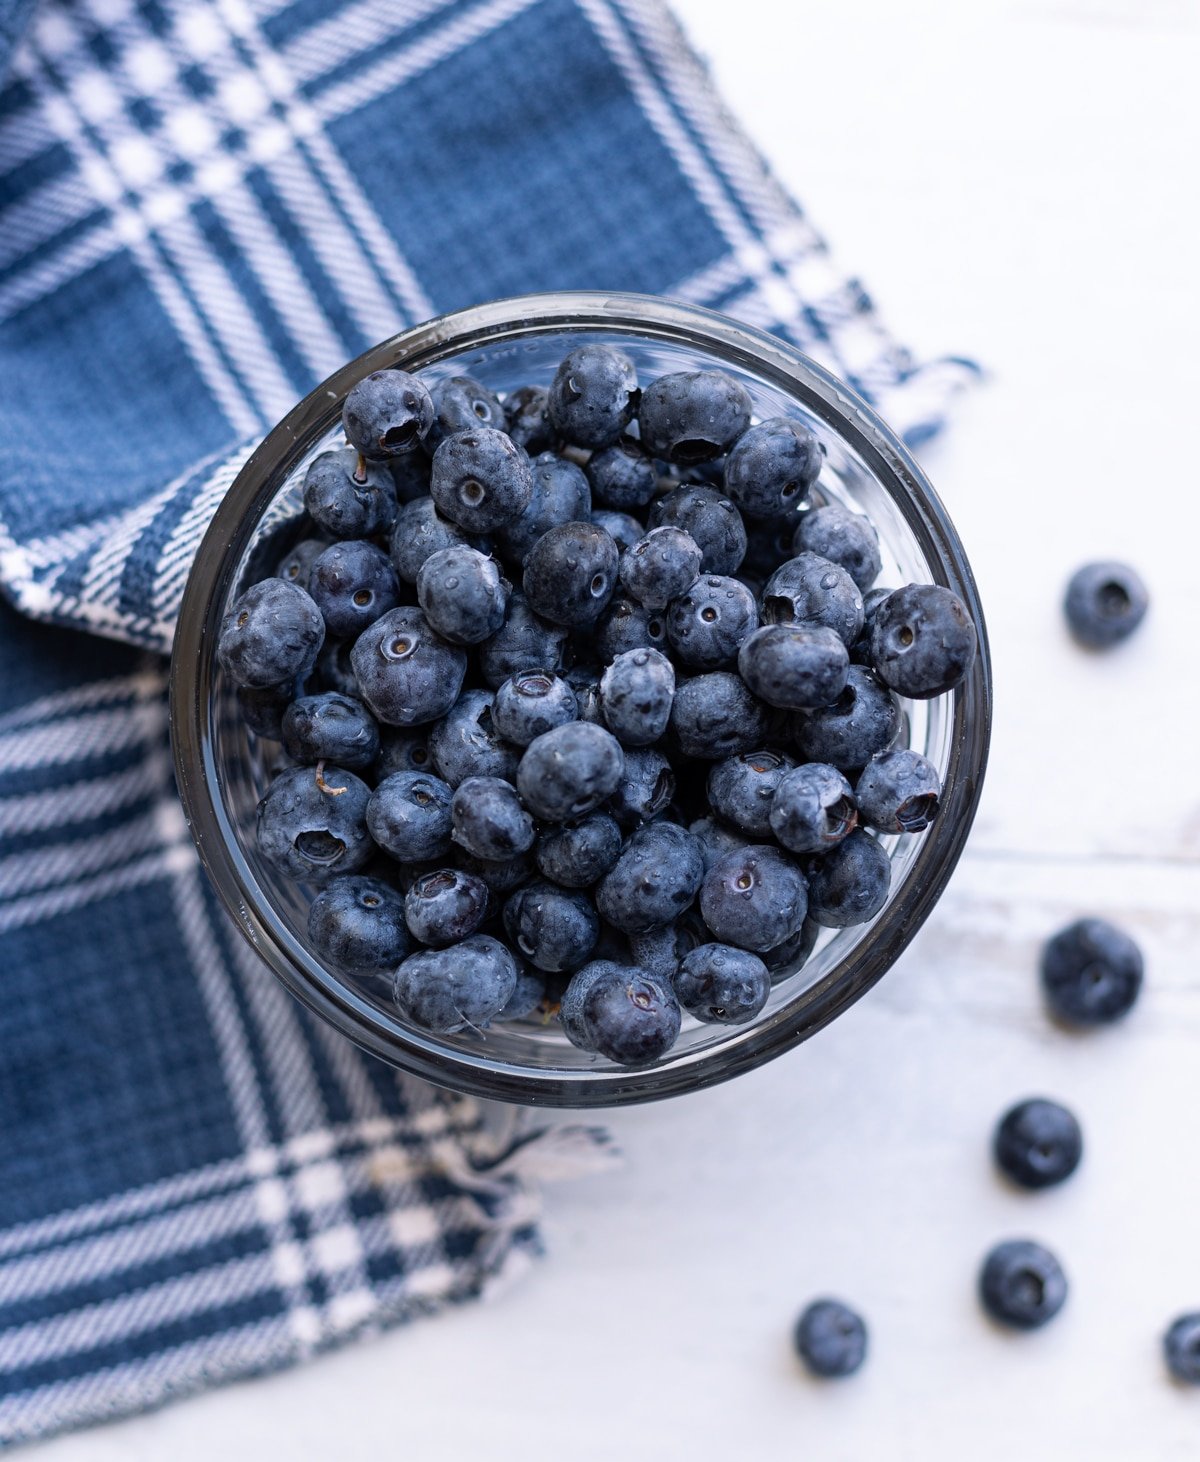 Glass bowl filled with fresh blueberries.